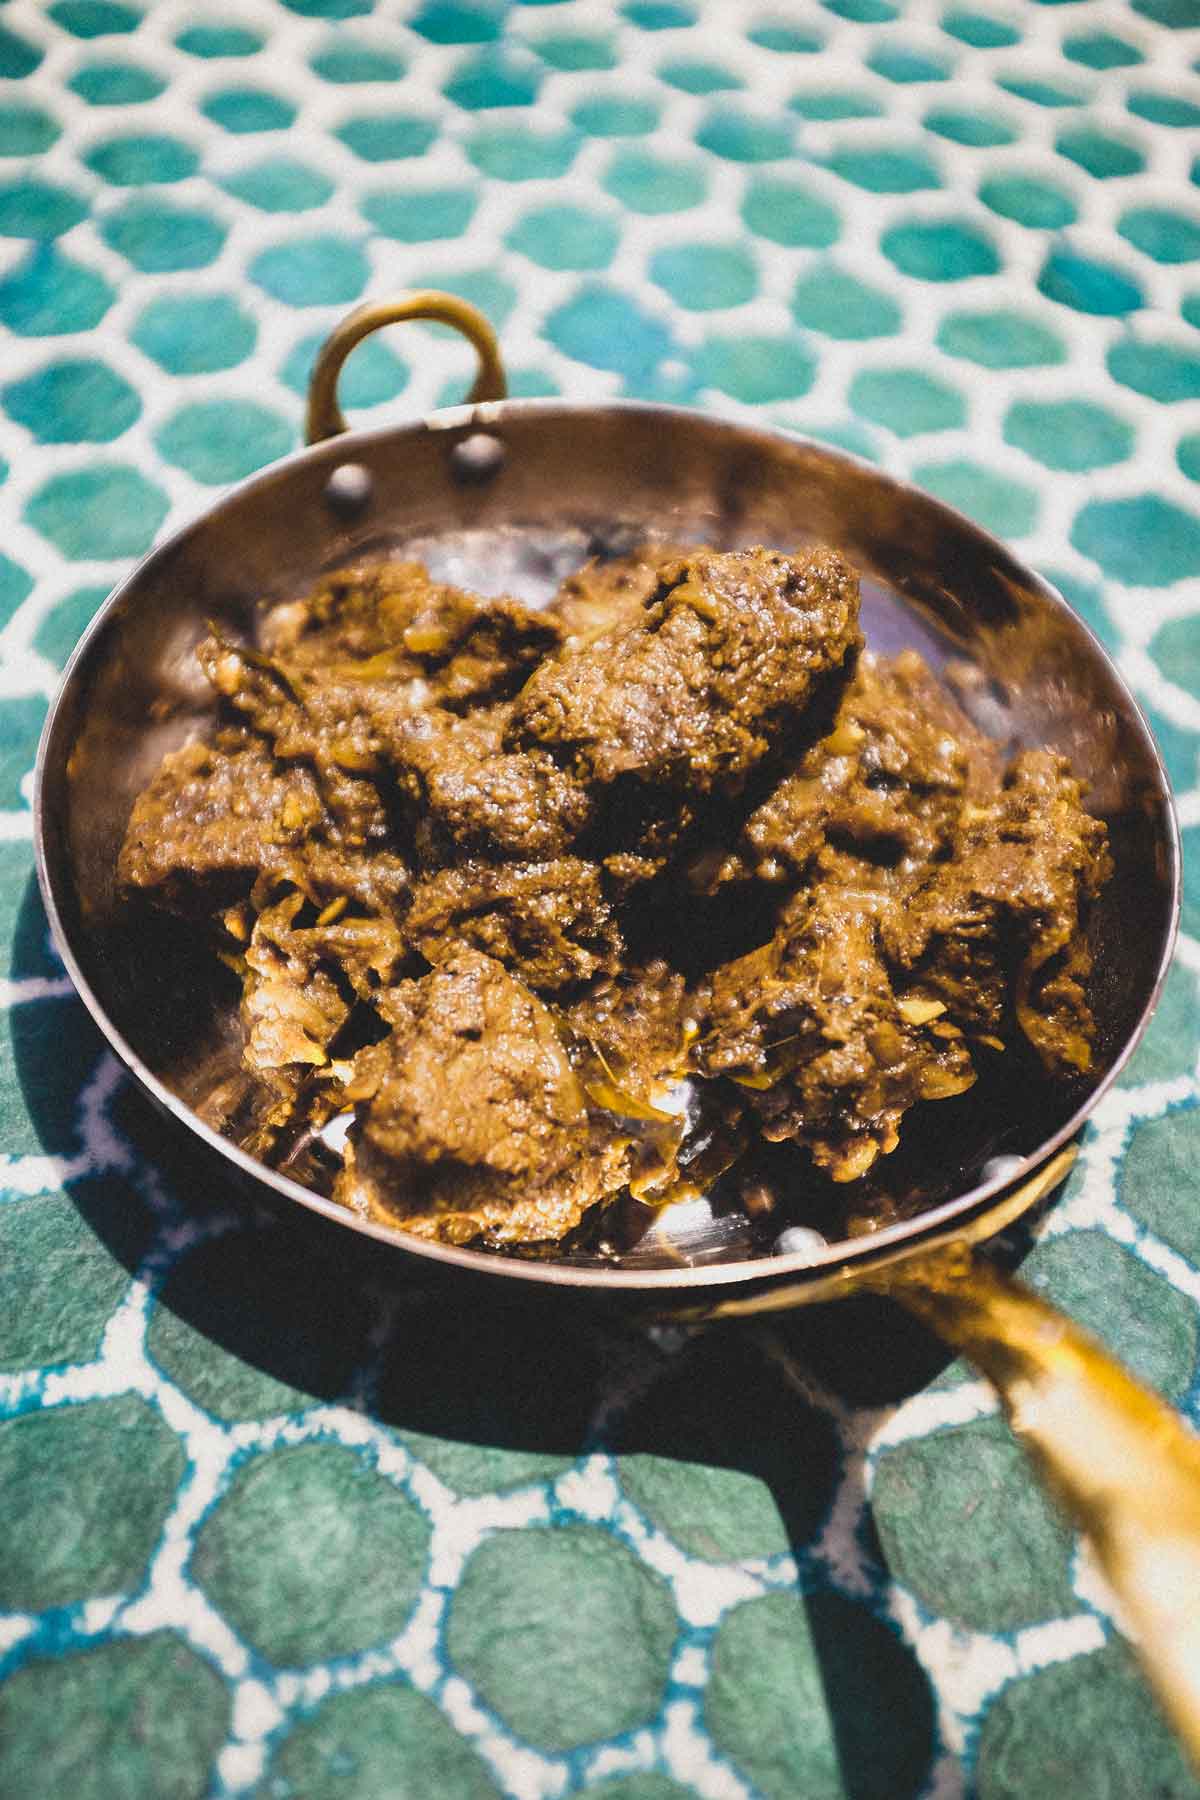 A small copper balti pan holds a portion of Indian Beef Balti